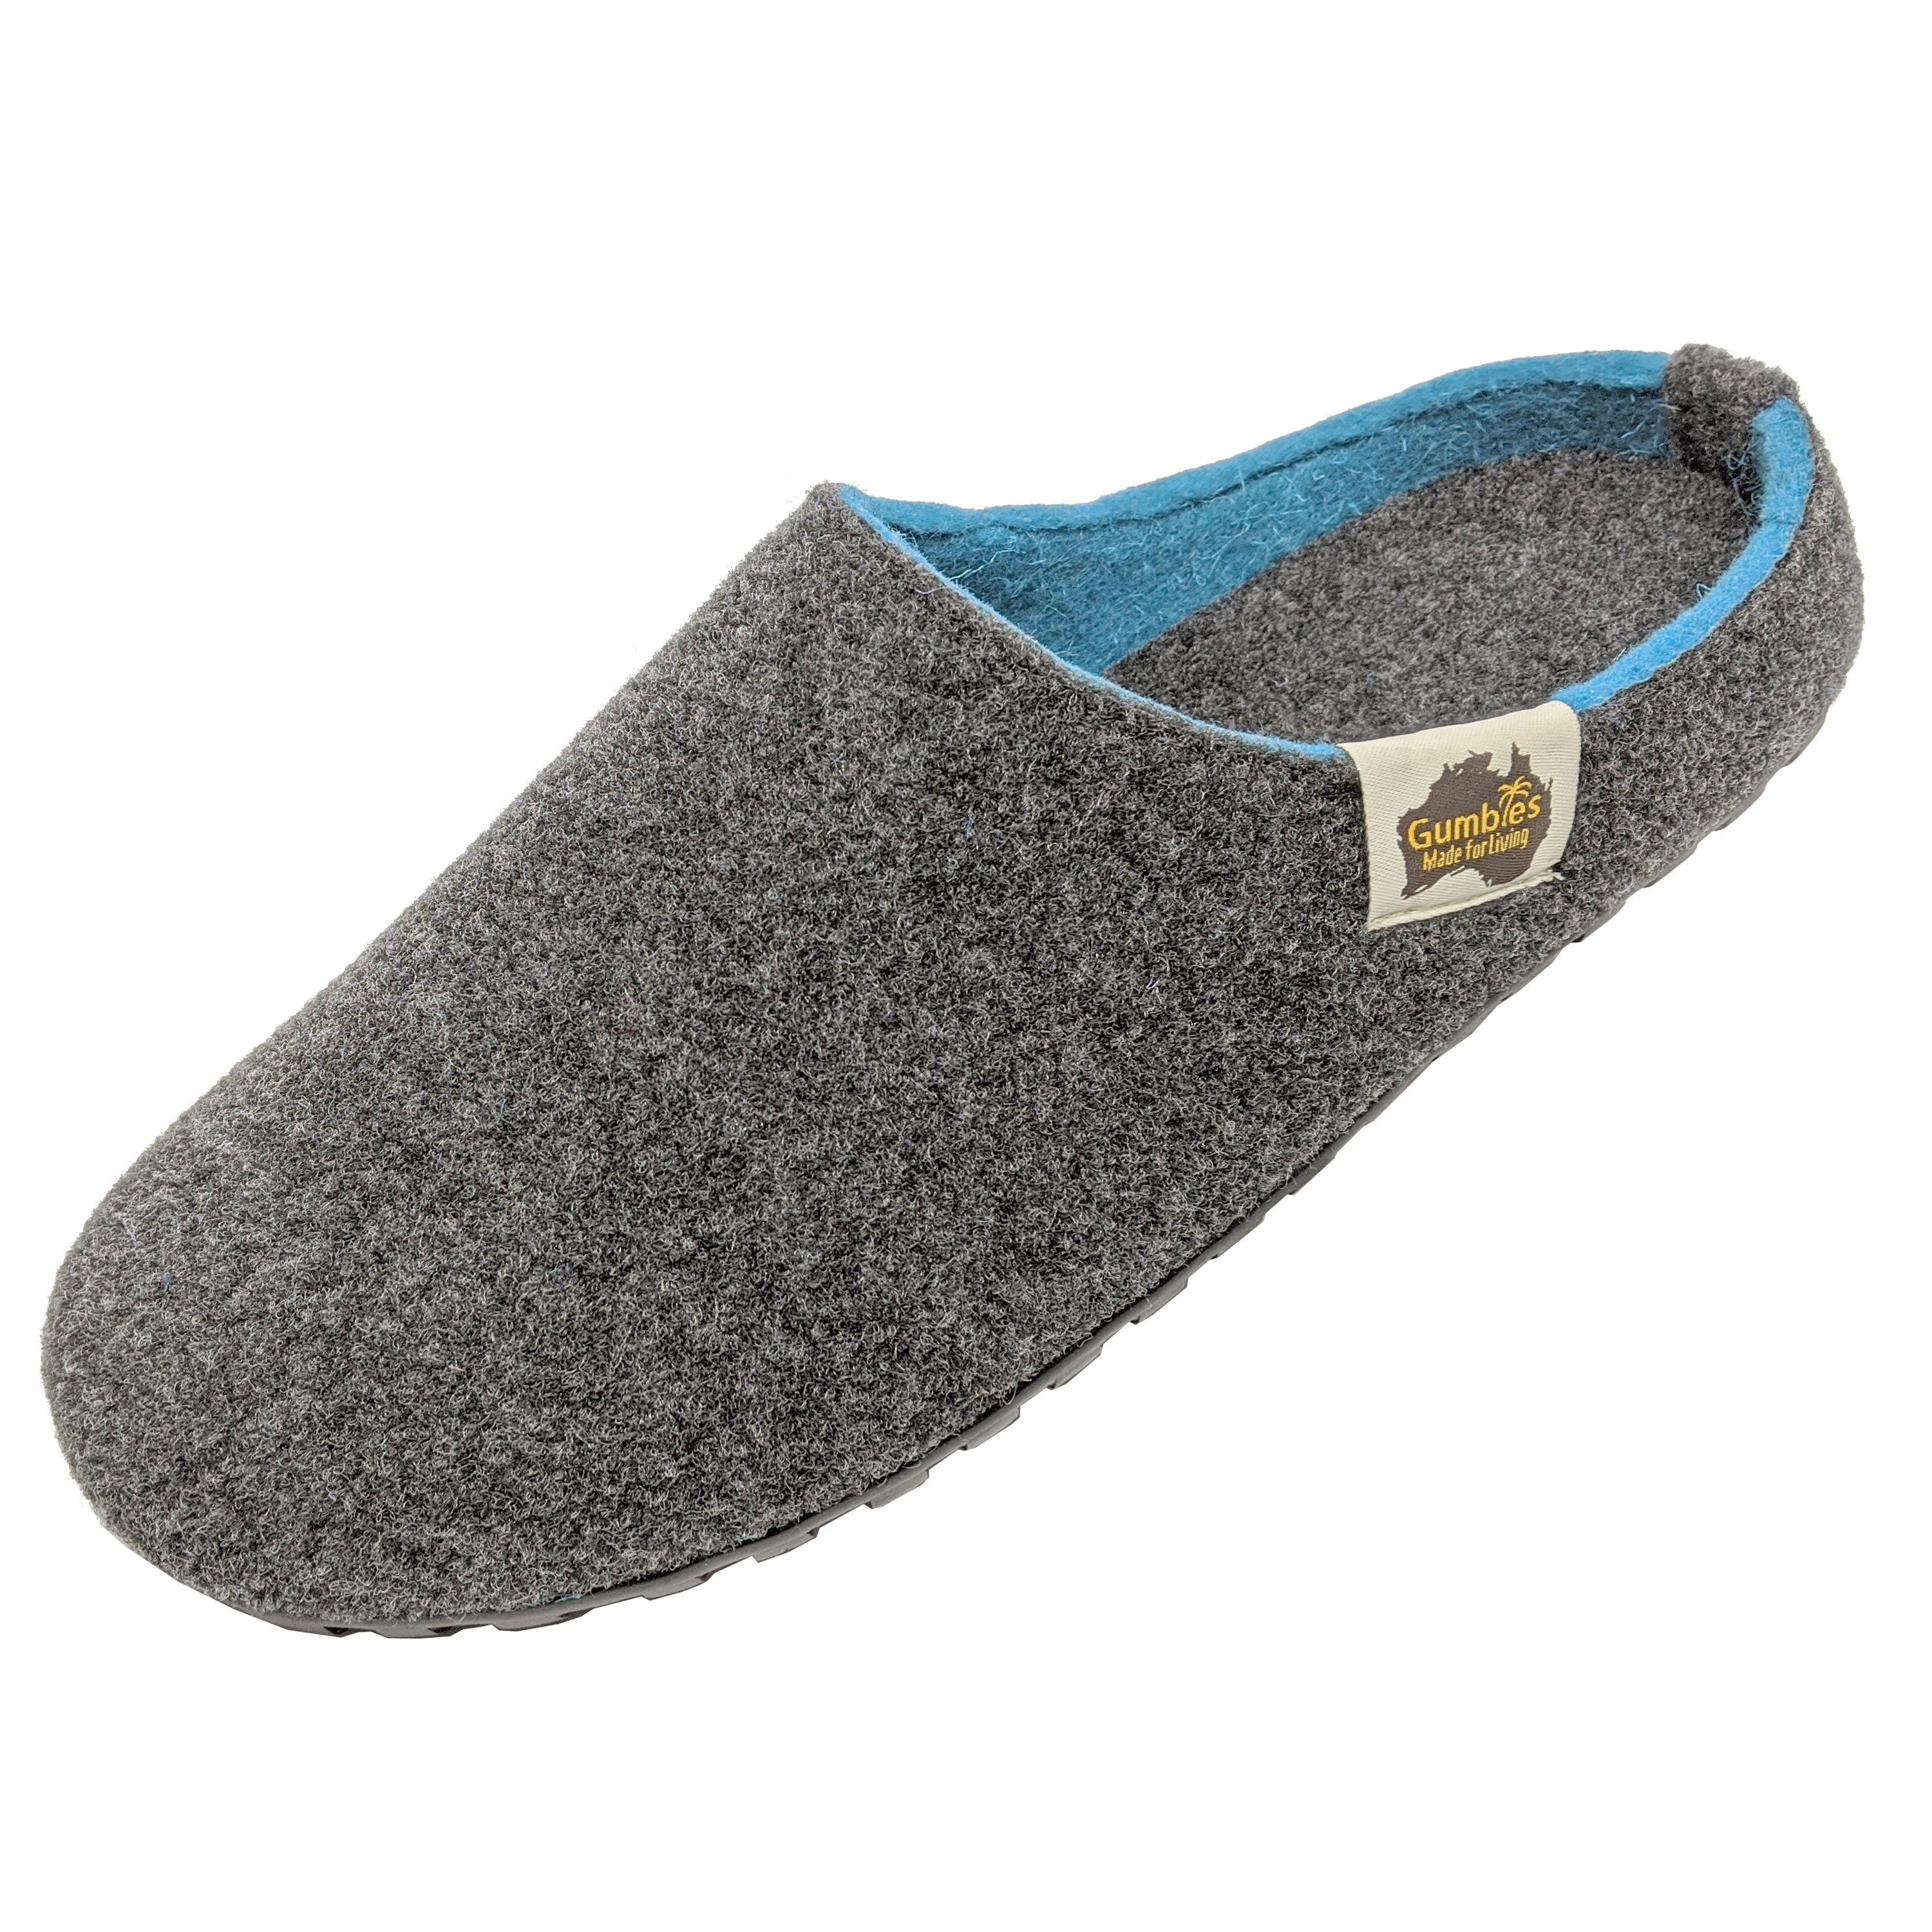 Gumbies Outback Slipper in Charcoal Turquoise Hausschuh aus recycelten Materialien »in farbenfrohen Designs«